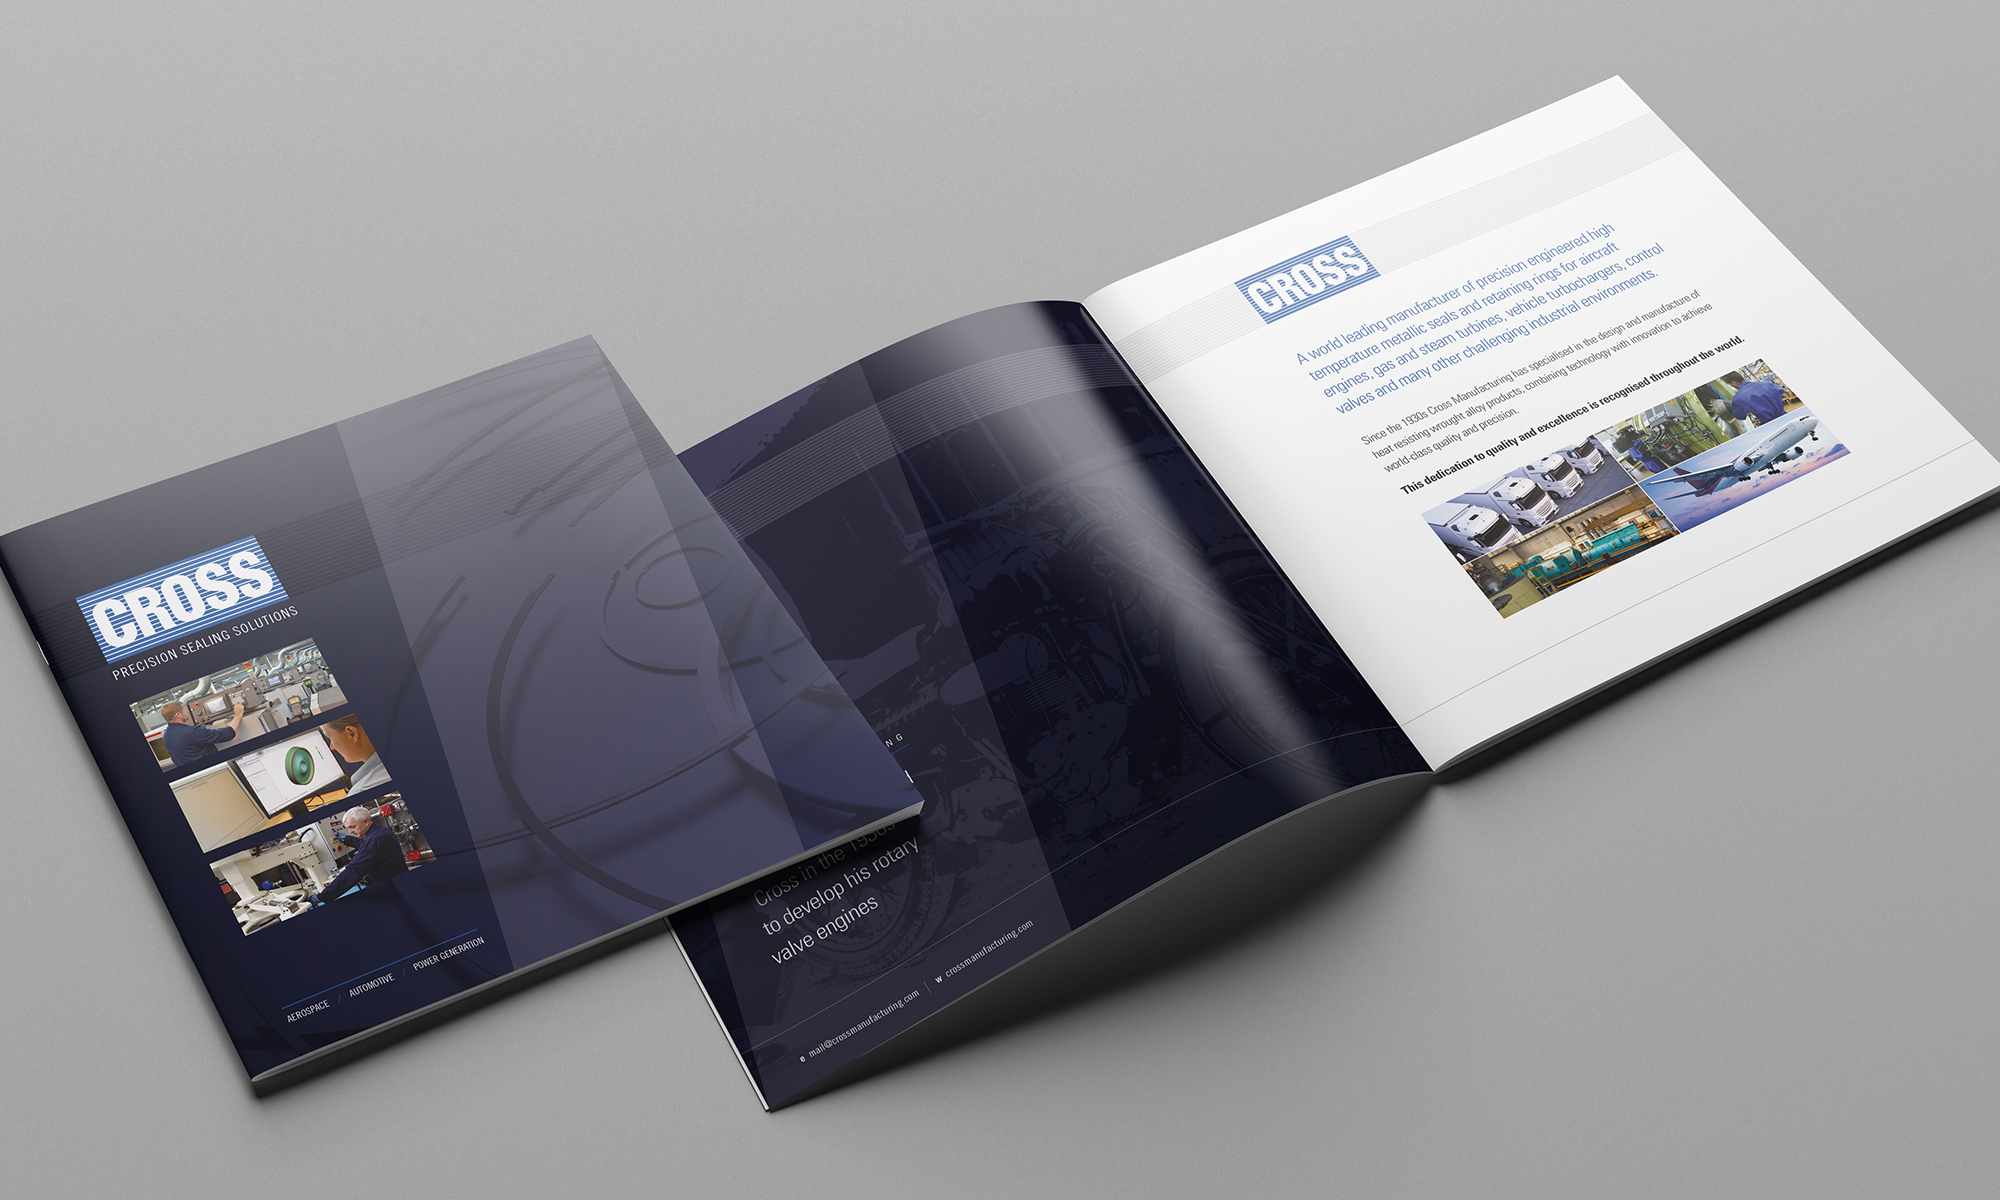 A gatefold brochure for Cross Manufacturing